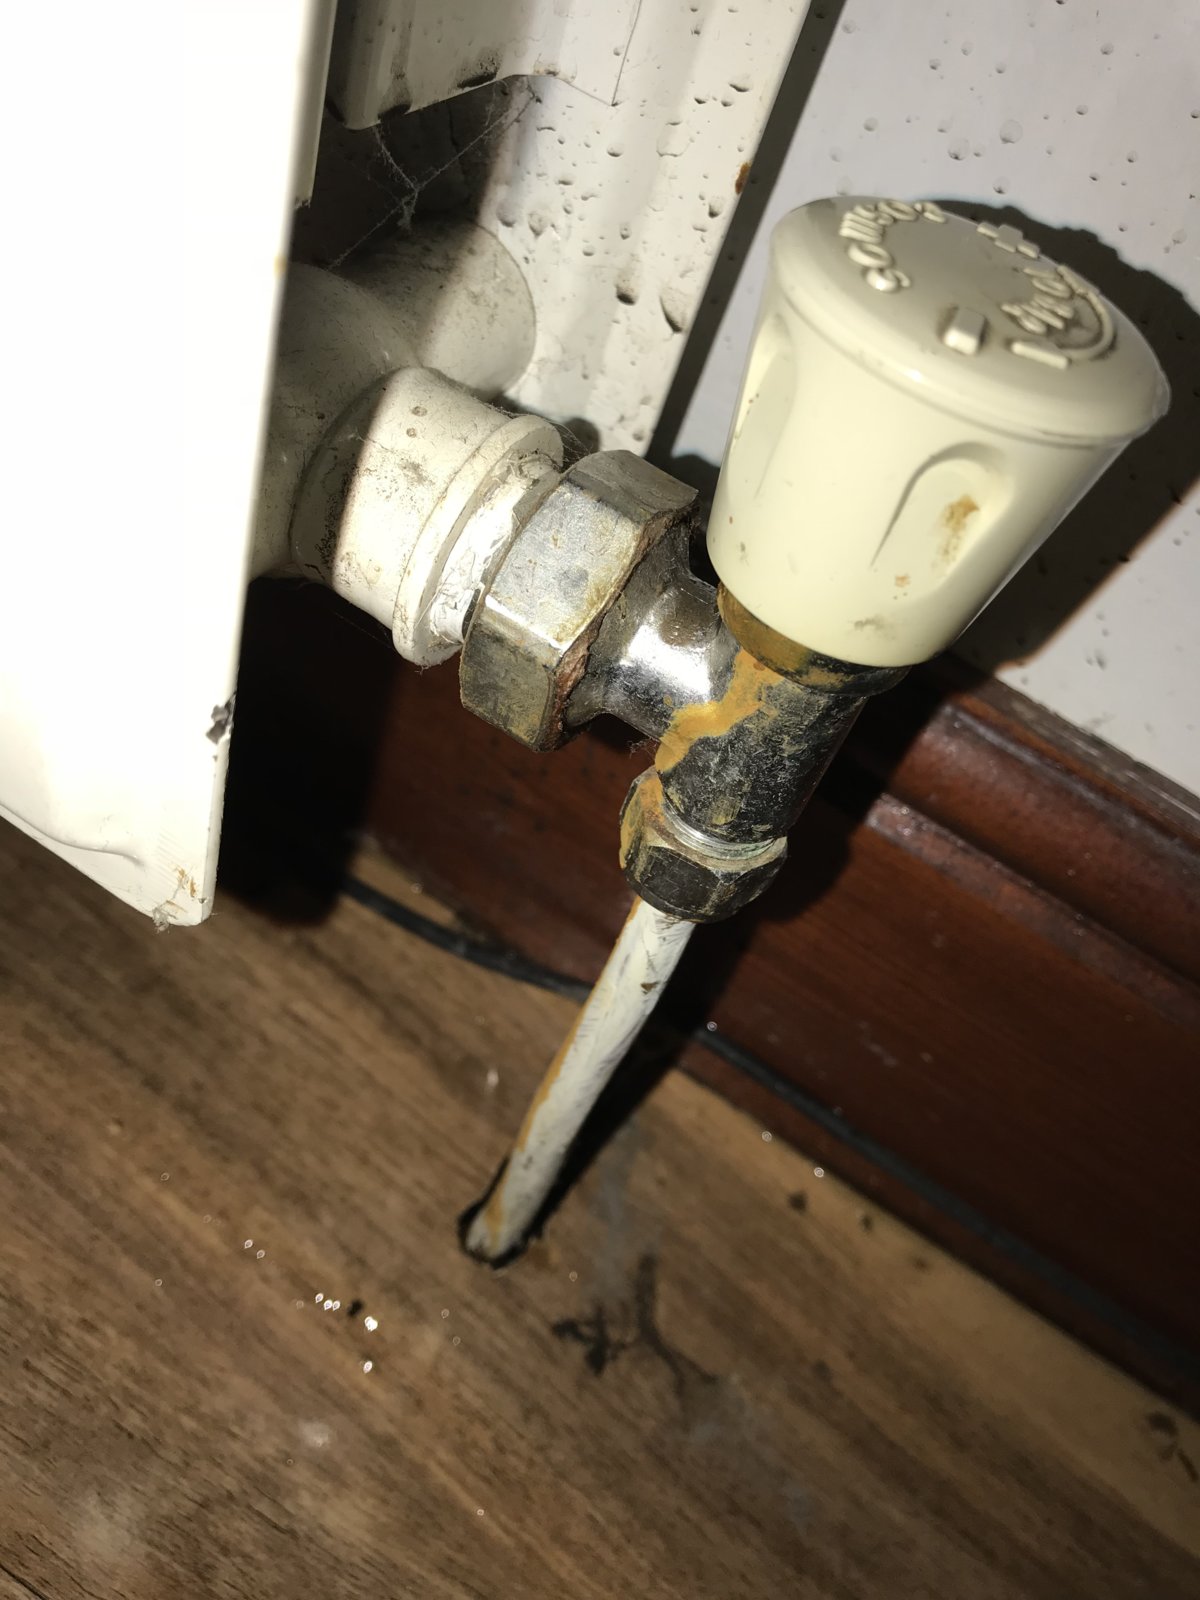 How do I fix this leaking radiator? | DIYnot Forums